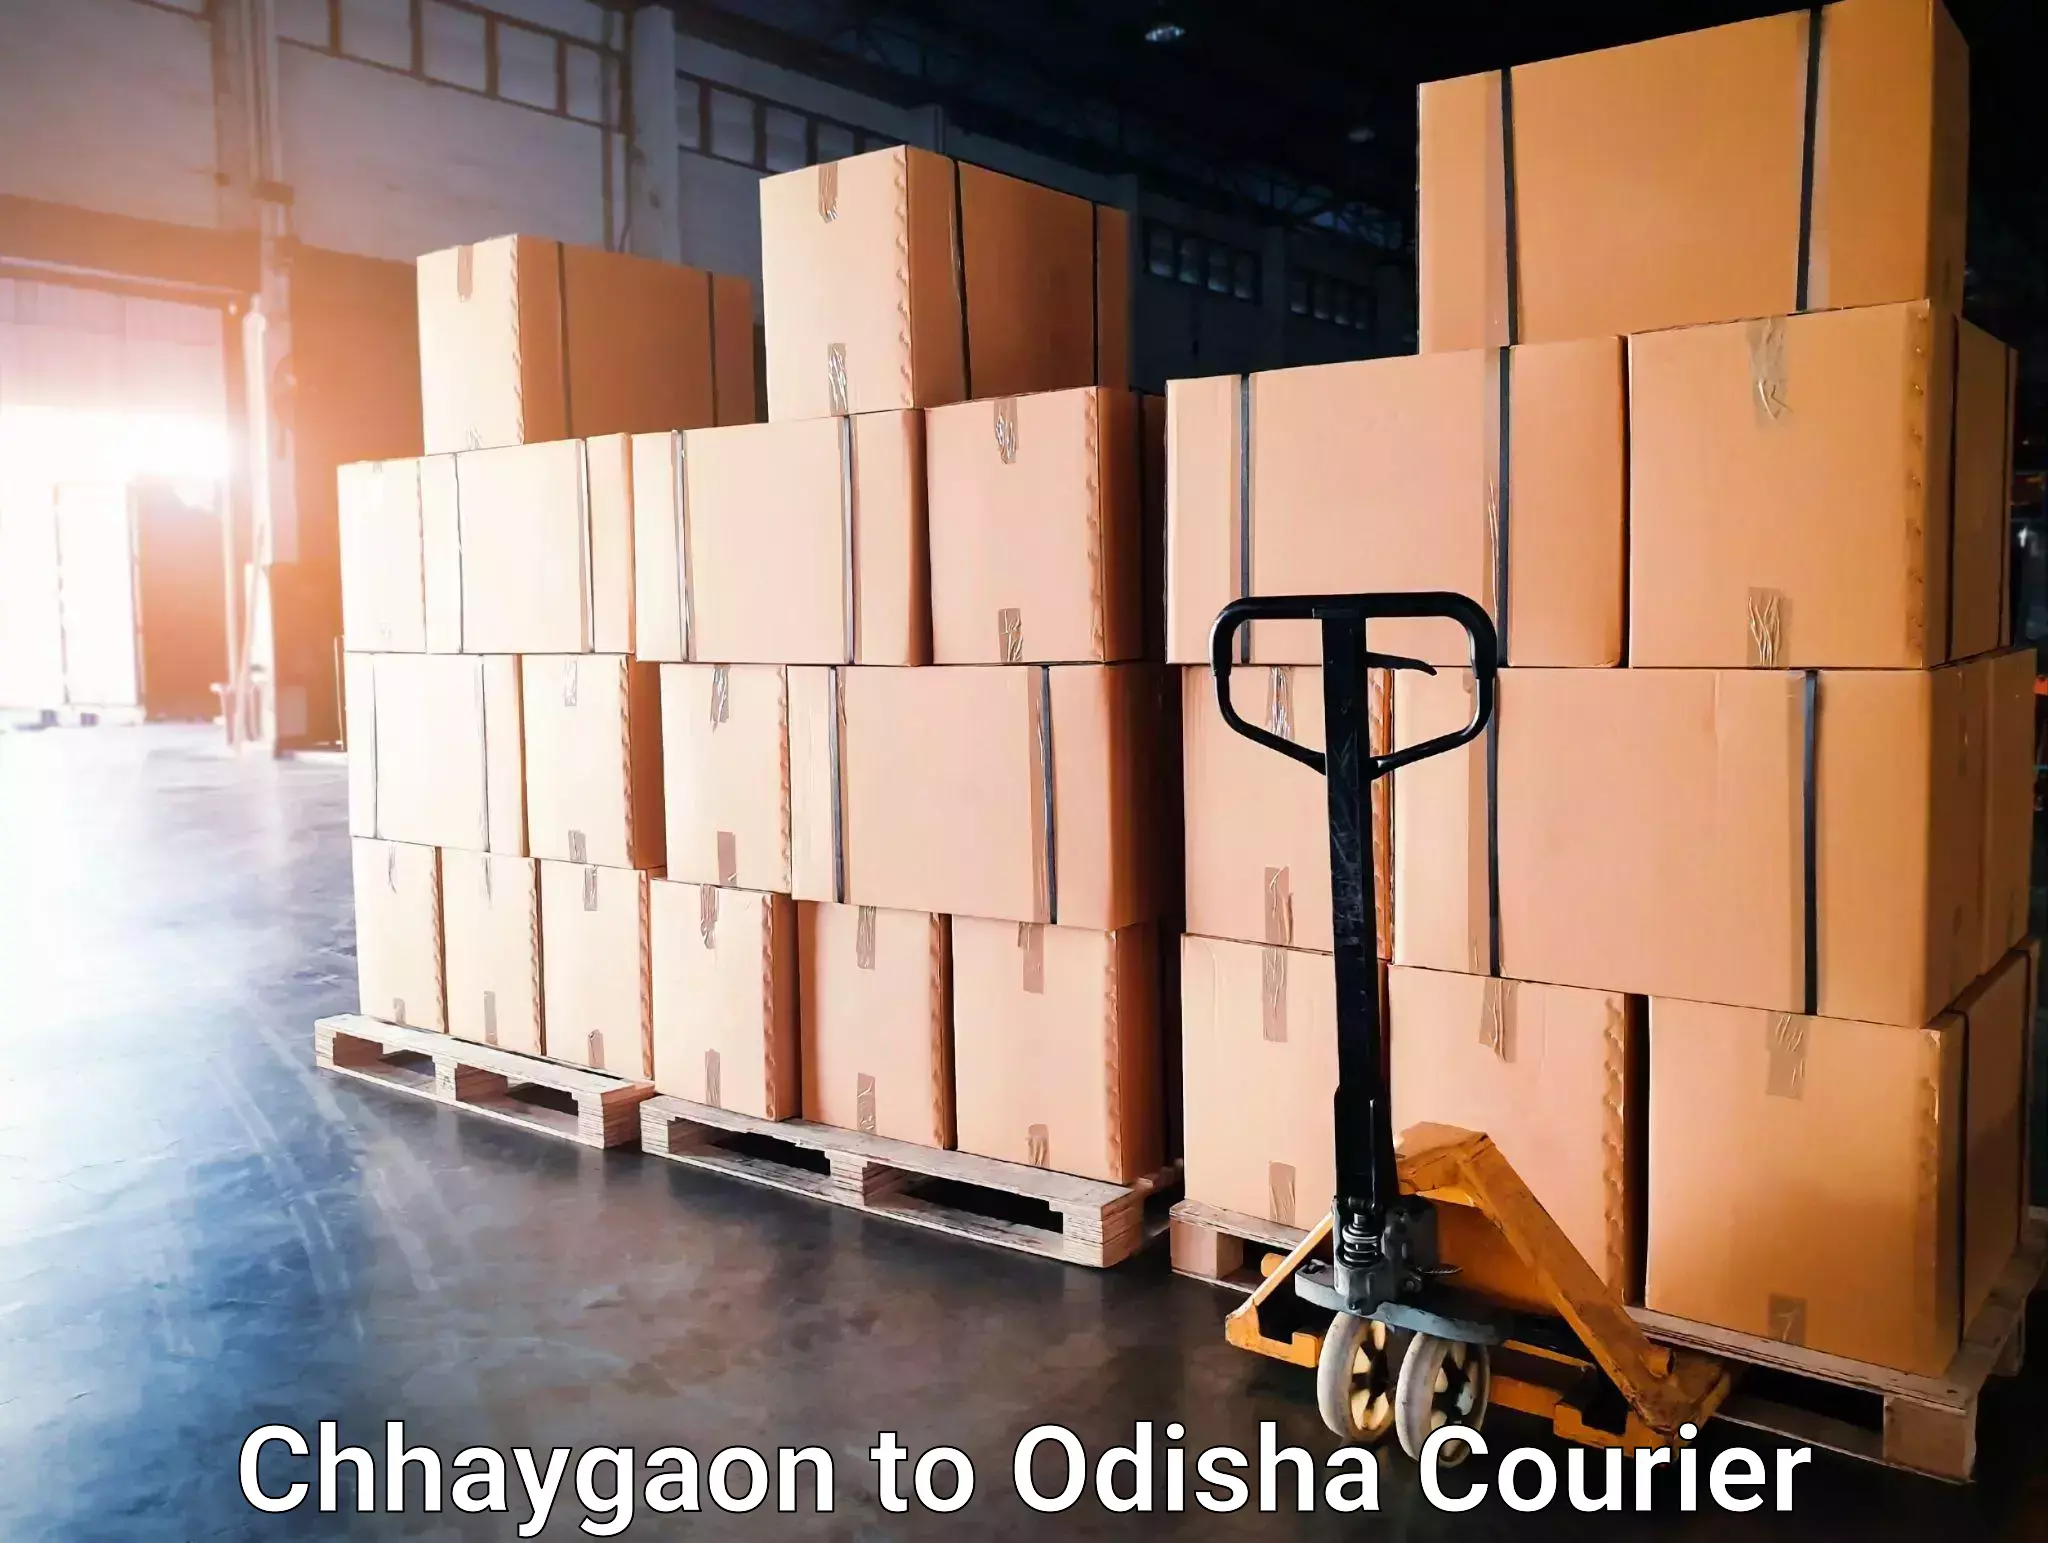 Flexible delivery schedules Chhaygaon to Kendrapara